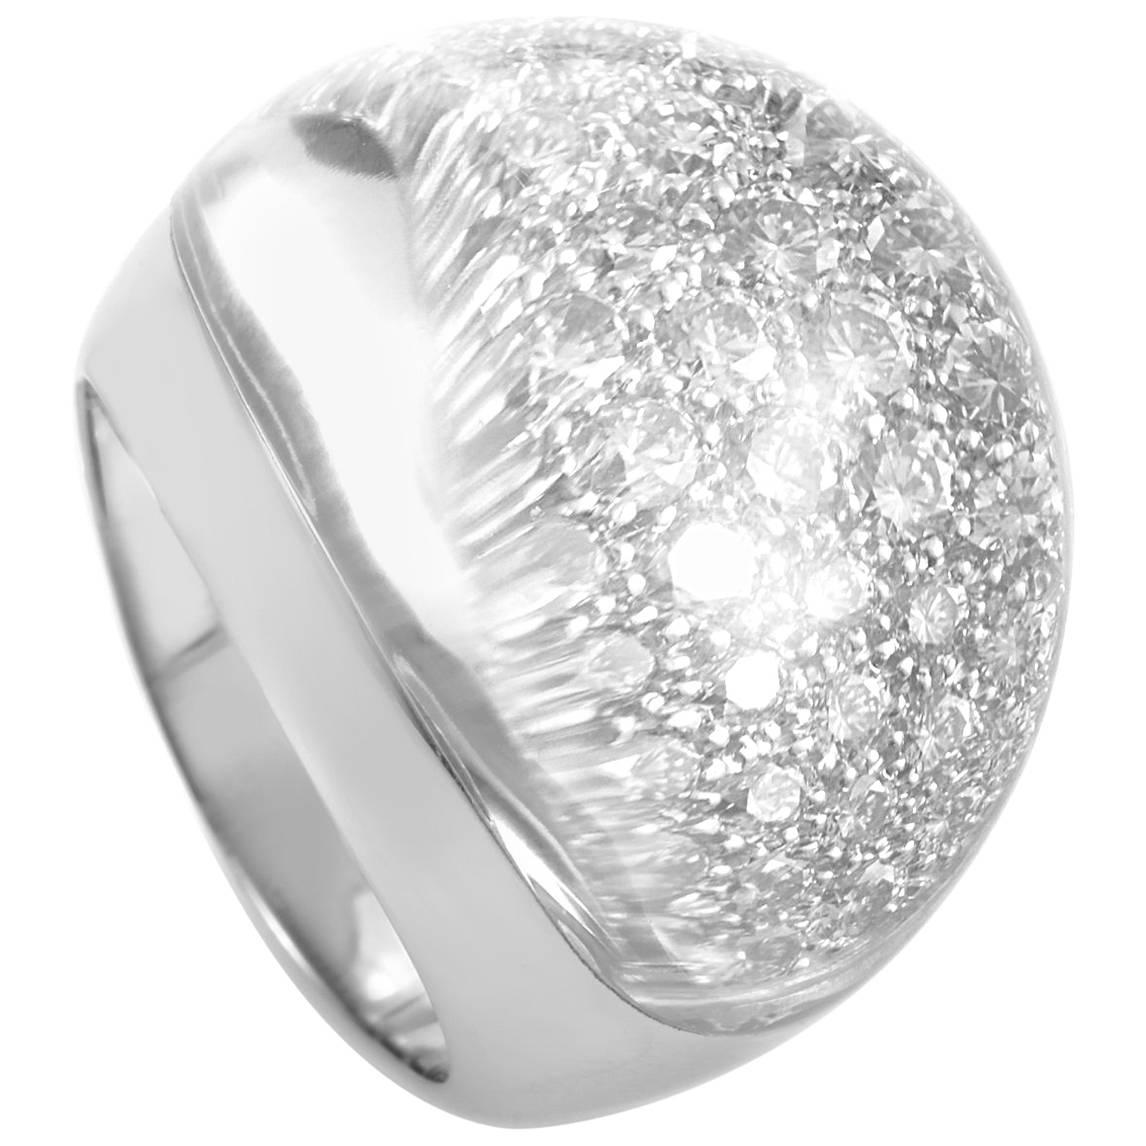 Cartier Myst de Cartier Large Diamond and Crystal White Gold Ring